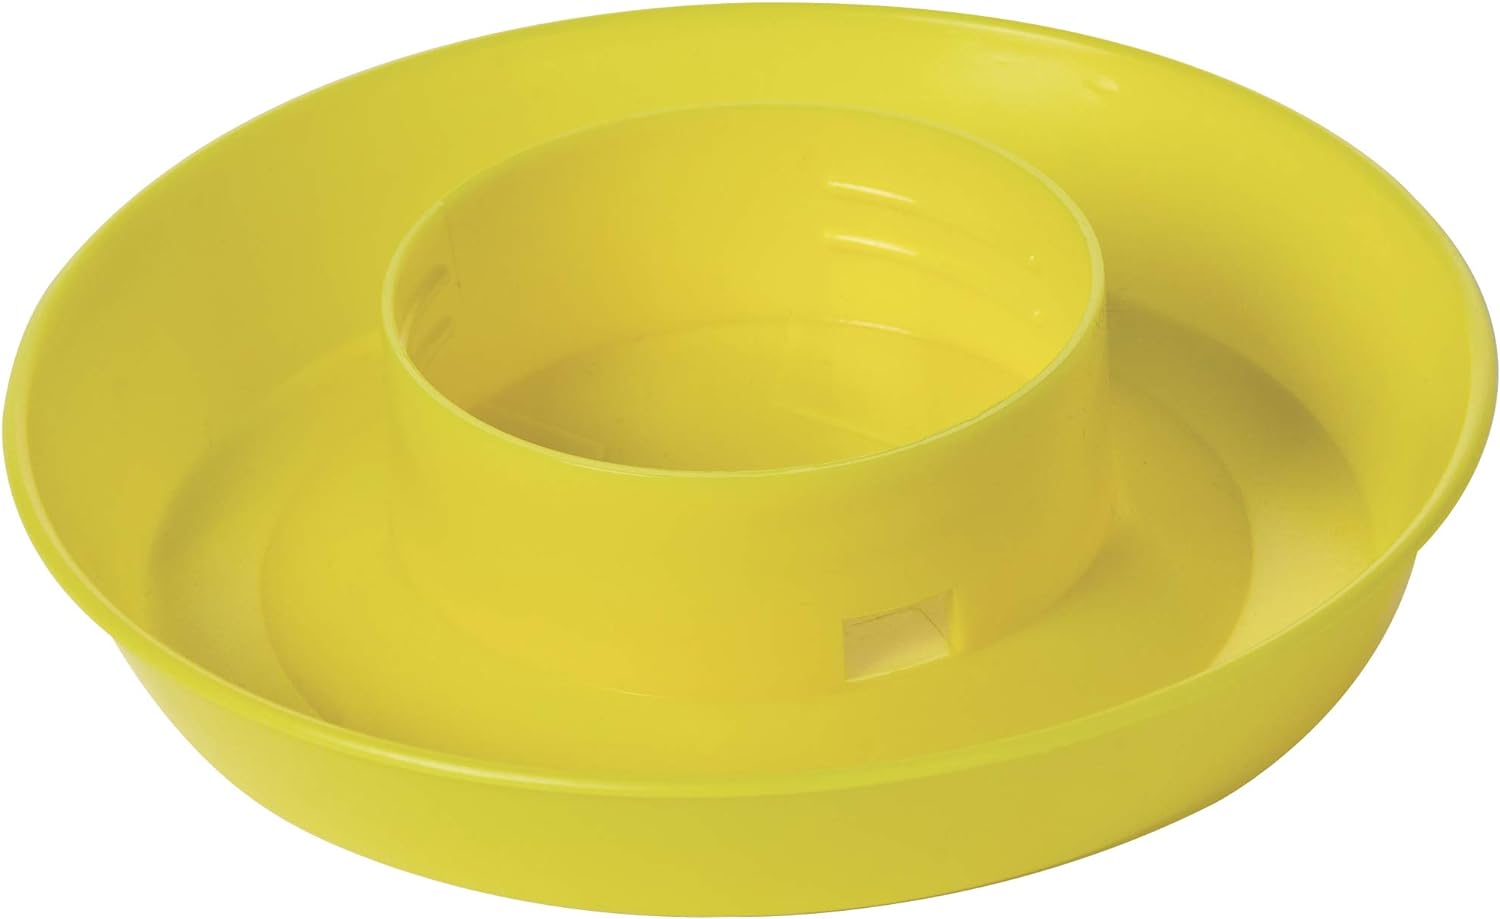 Little Giant 1 Quart Screw-On Waterer Base - great in aviary with lots of birds - Cage Accessory - Glamorous Gouldians